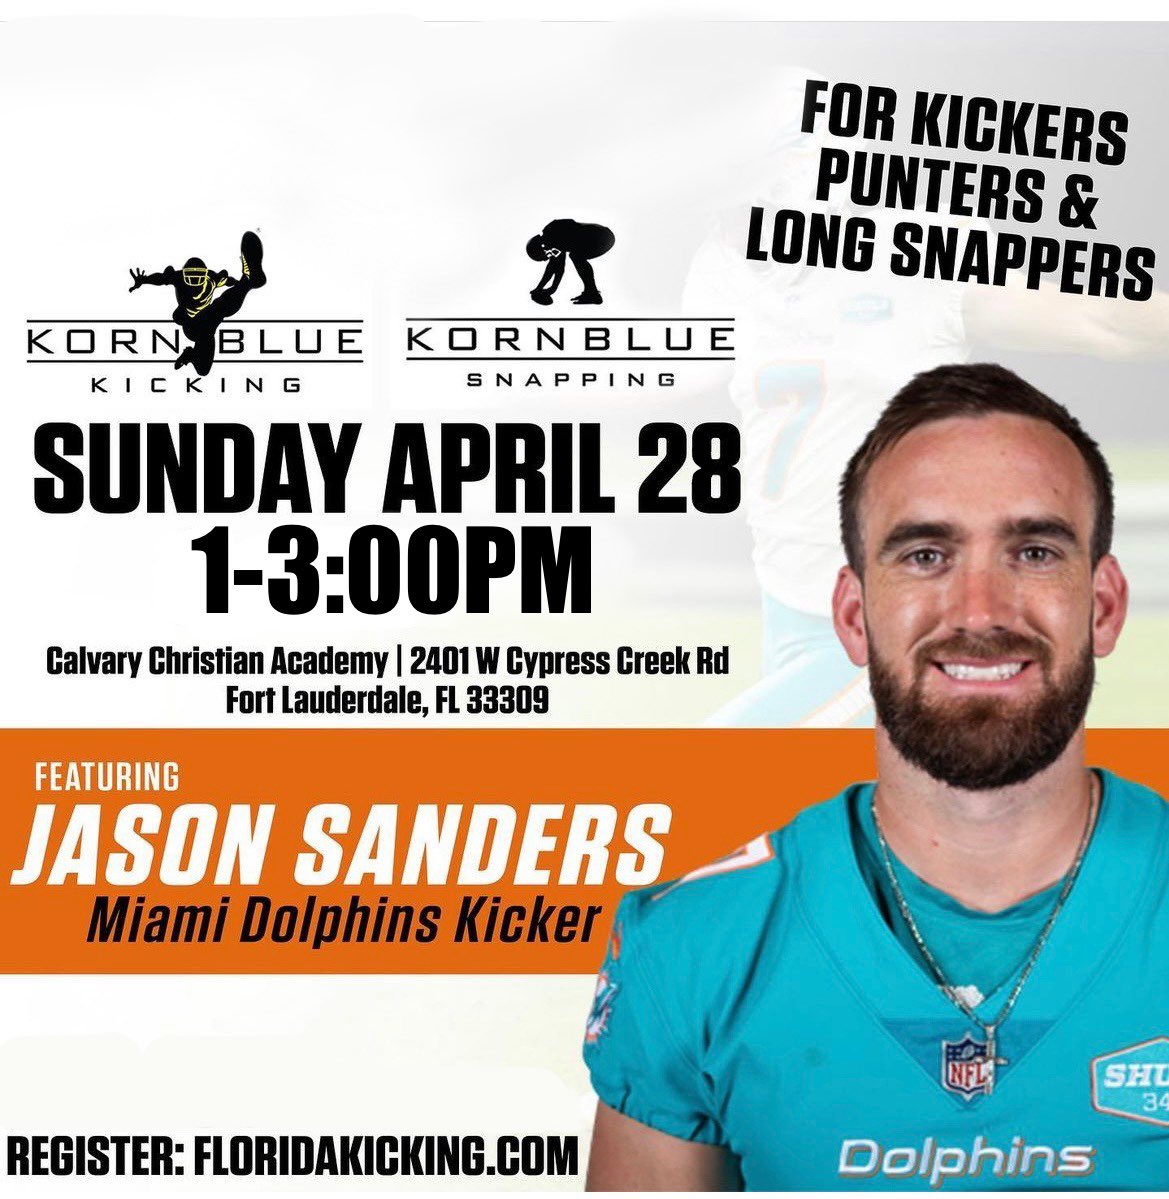 Big 𝙏𝙃𝘼𝙉𝙆 𝙔𝙊𝙐 to @MiamiDolphins kicker @jasonsanderss🐬 for spending the day at our South Florida Training location‼️ Energy was 🆙 today. Guys got better preparing for spring practice. 🗓️ Next session…May 5. @KornblueKicking @KornblueSnappin